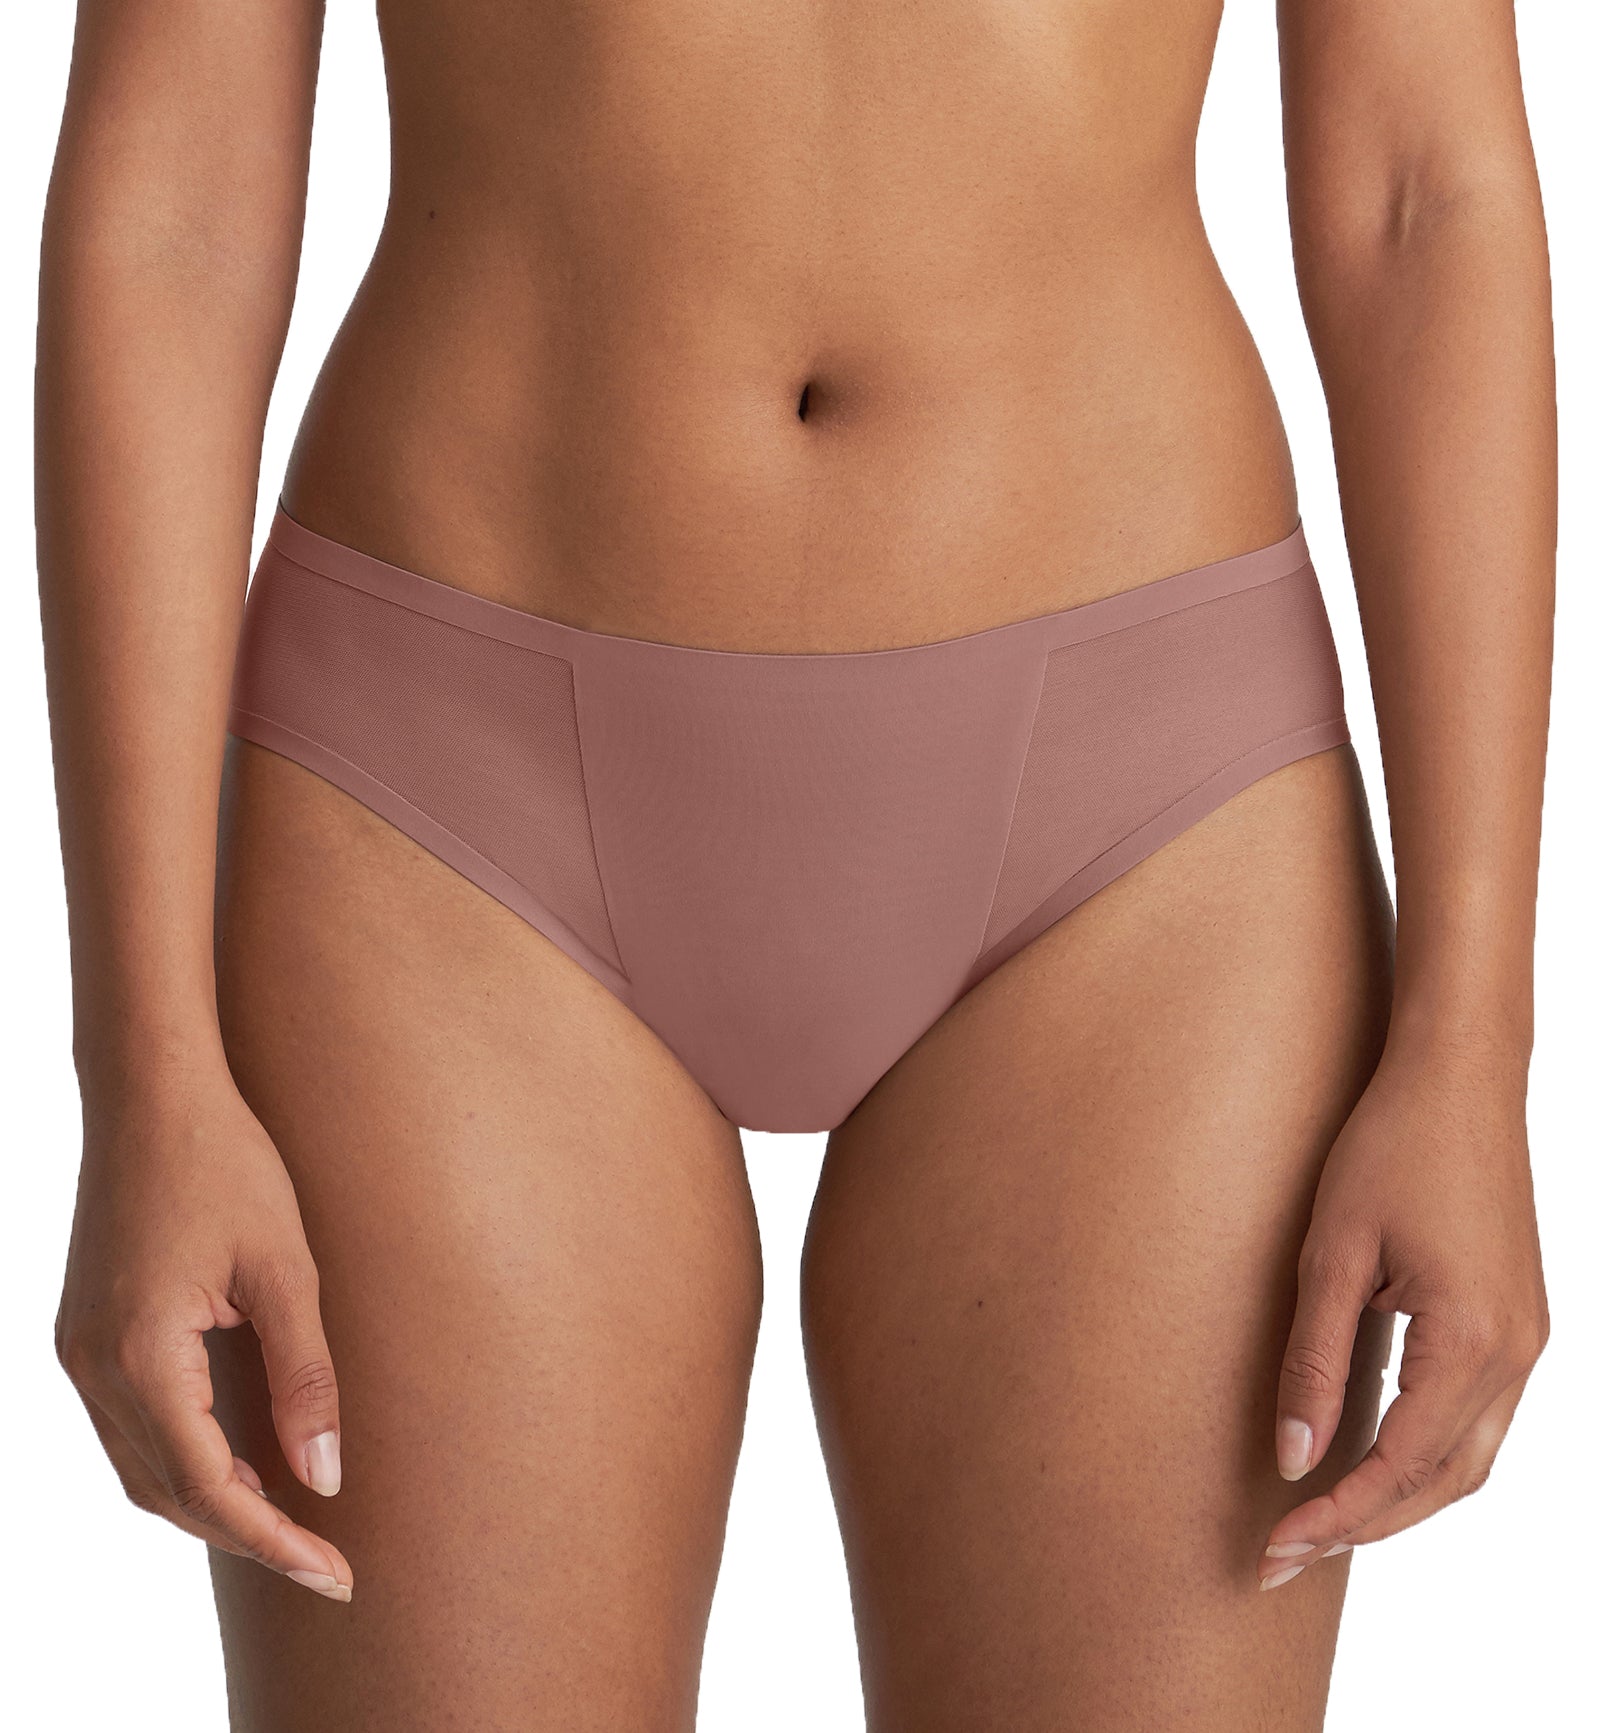 Marie Jo Louie Matching Rio Brief (0522090),XS,Satin Taupe - Satin Taupe,XS